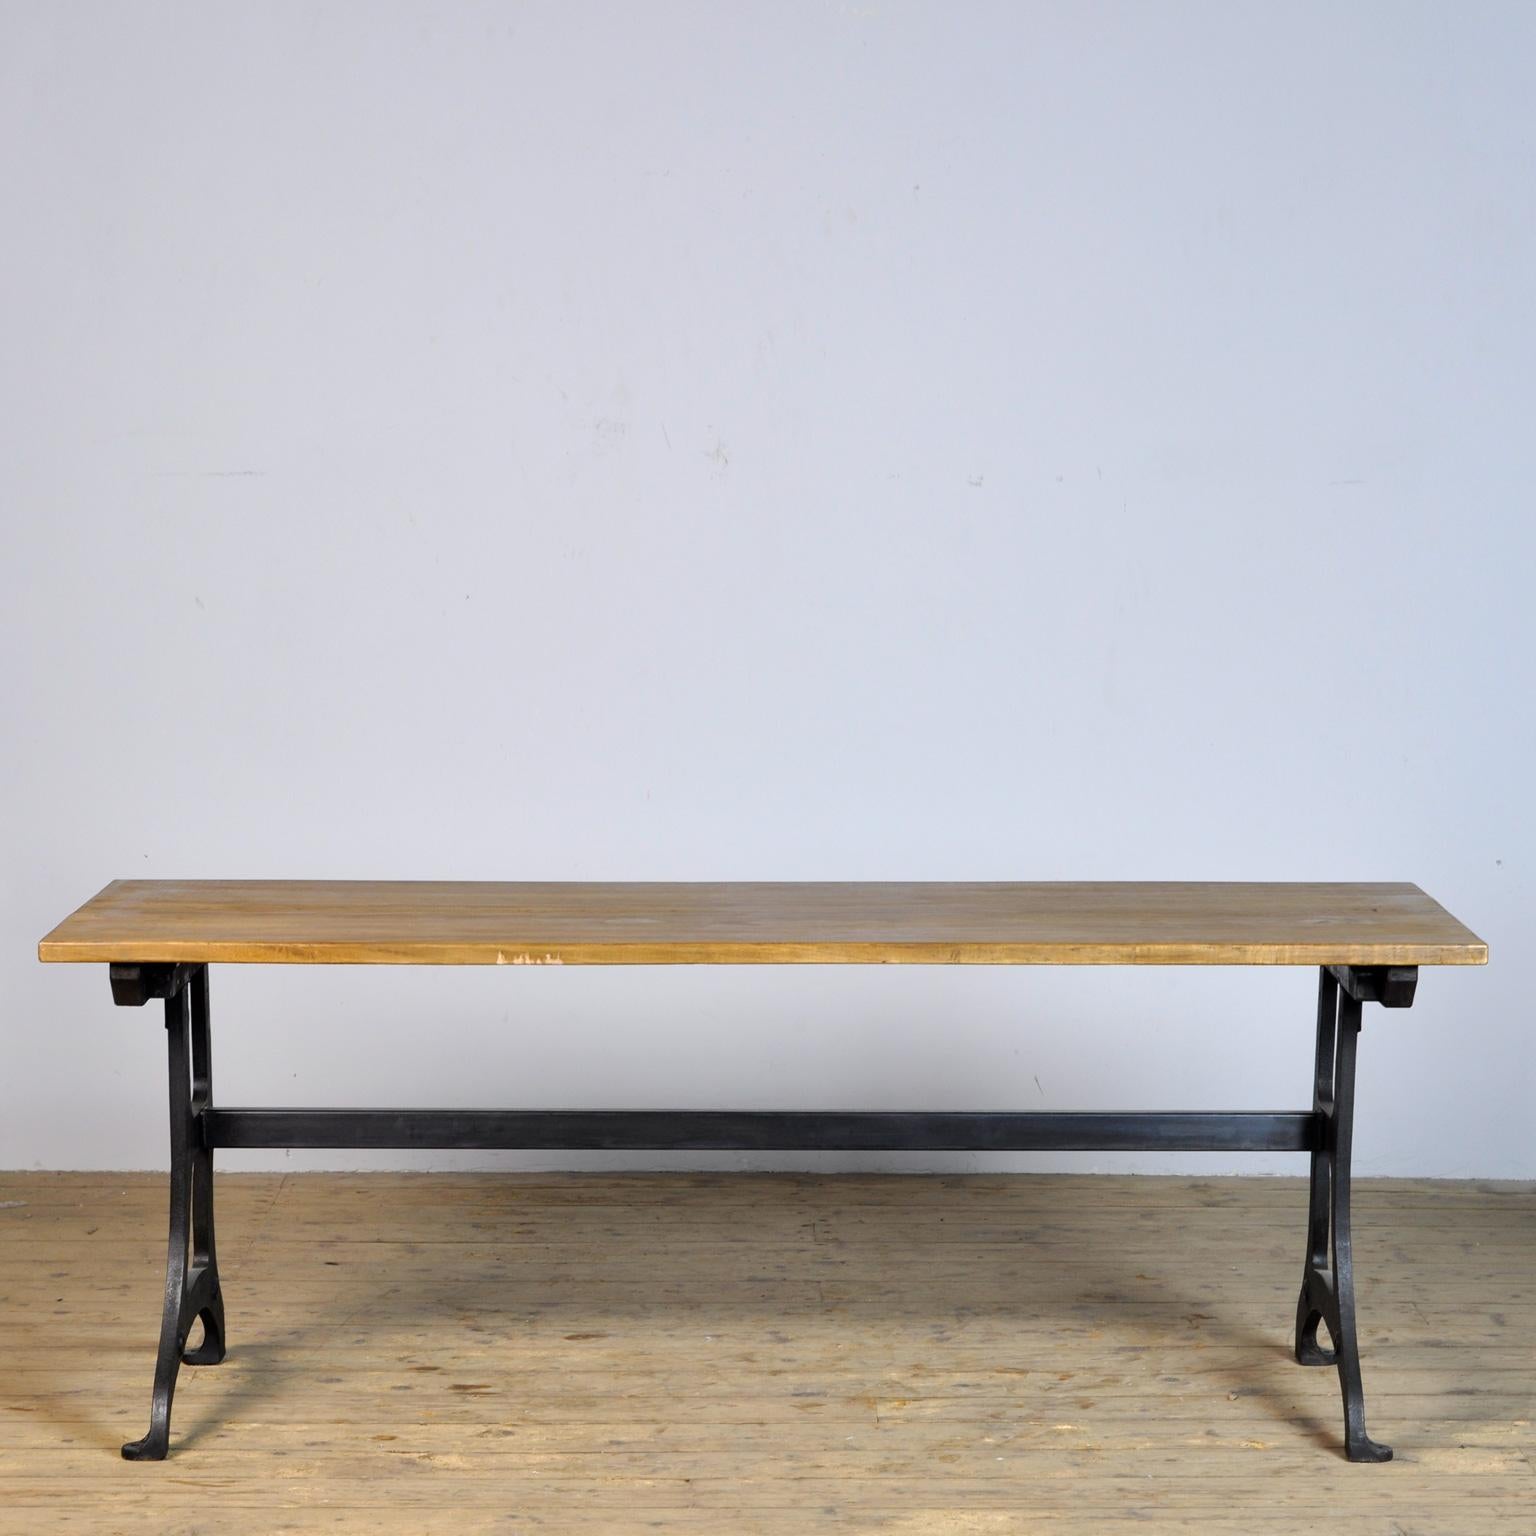 The table is made from an old industrial cast iron machine base and a wooden top. Big enough to seat 6 people.
 